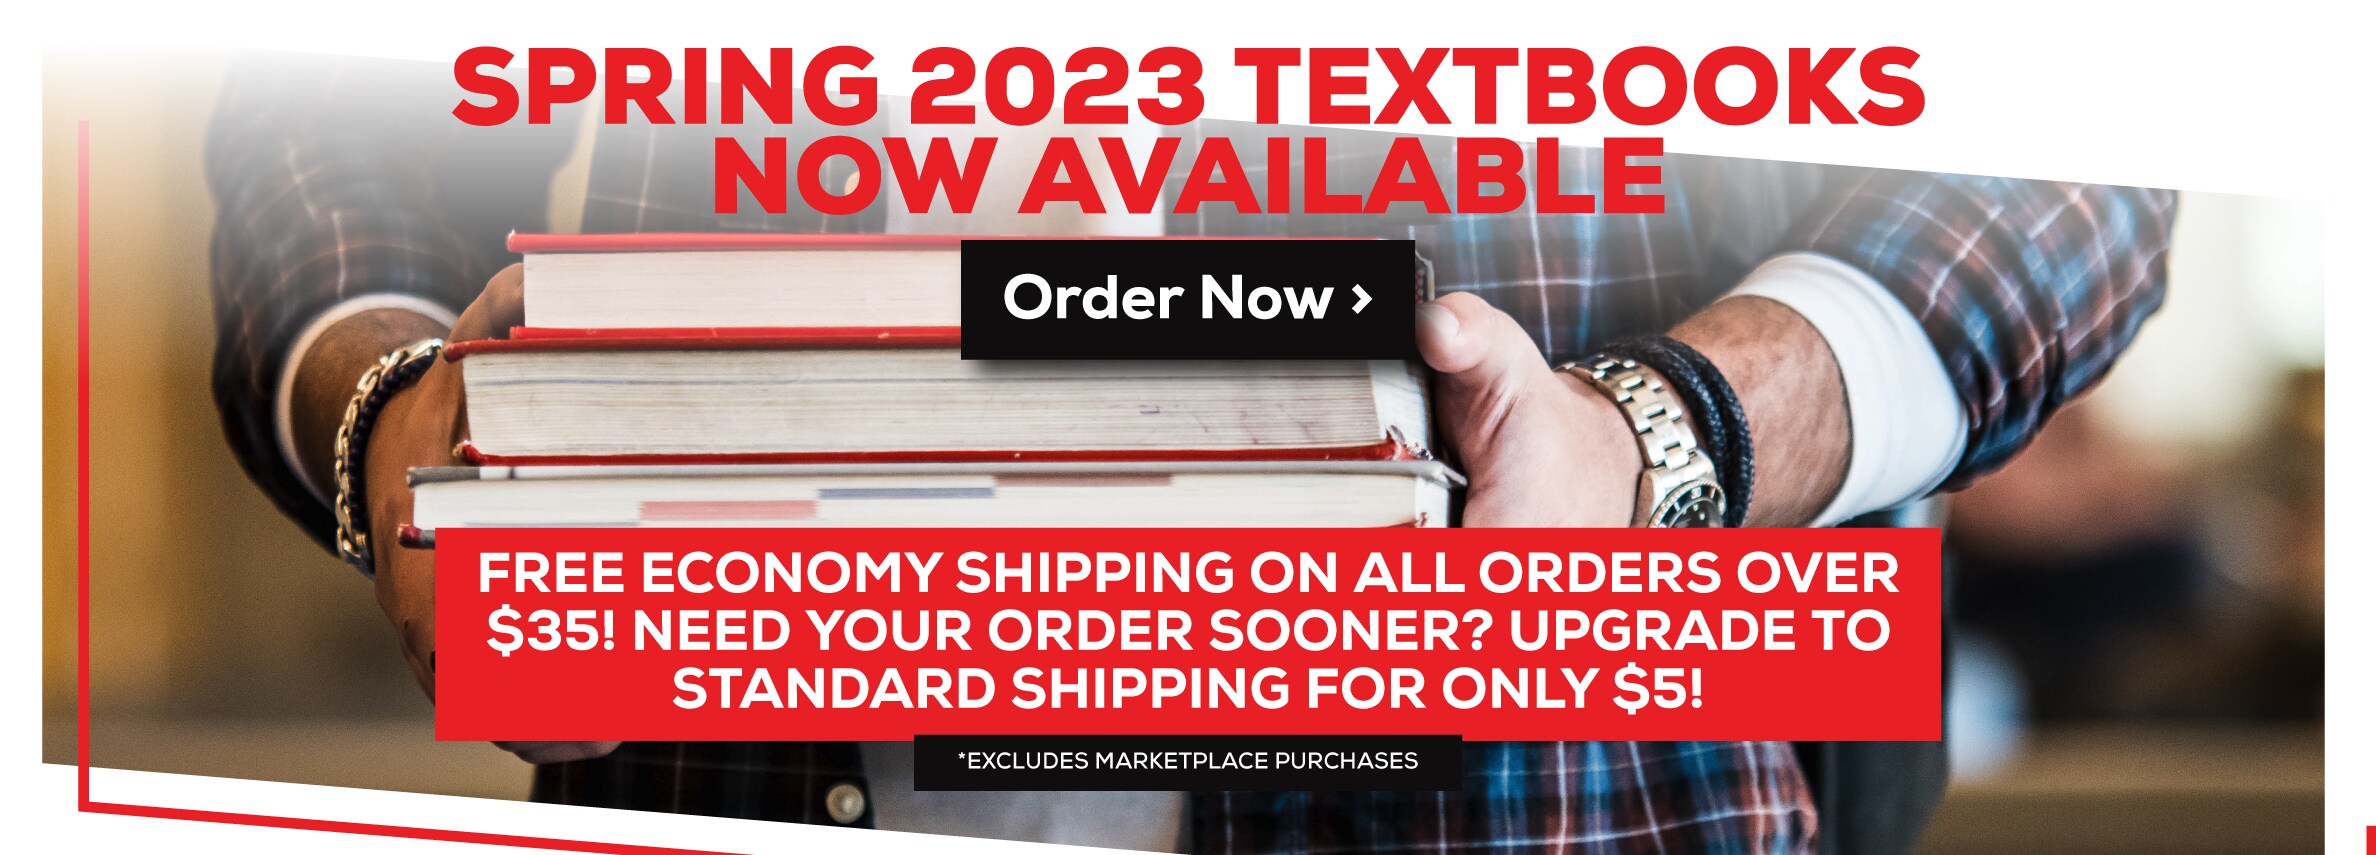 Spring 2023 Textbooks Now available. Order now. Free economy shipping on all orders over $35! Need your order sooner? Upgrade to standard shipping for only $5! Excludes marketplace purchases